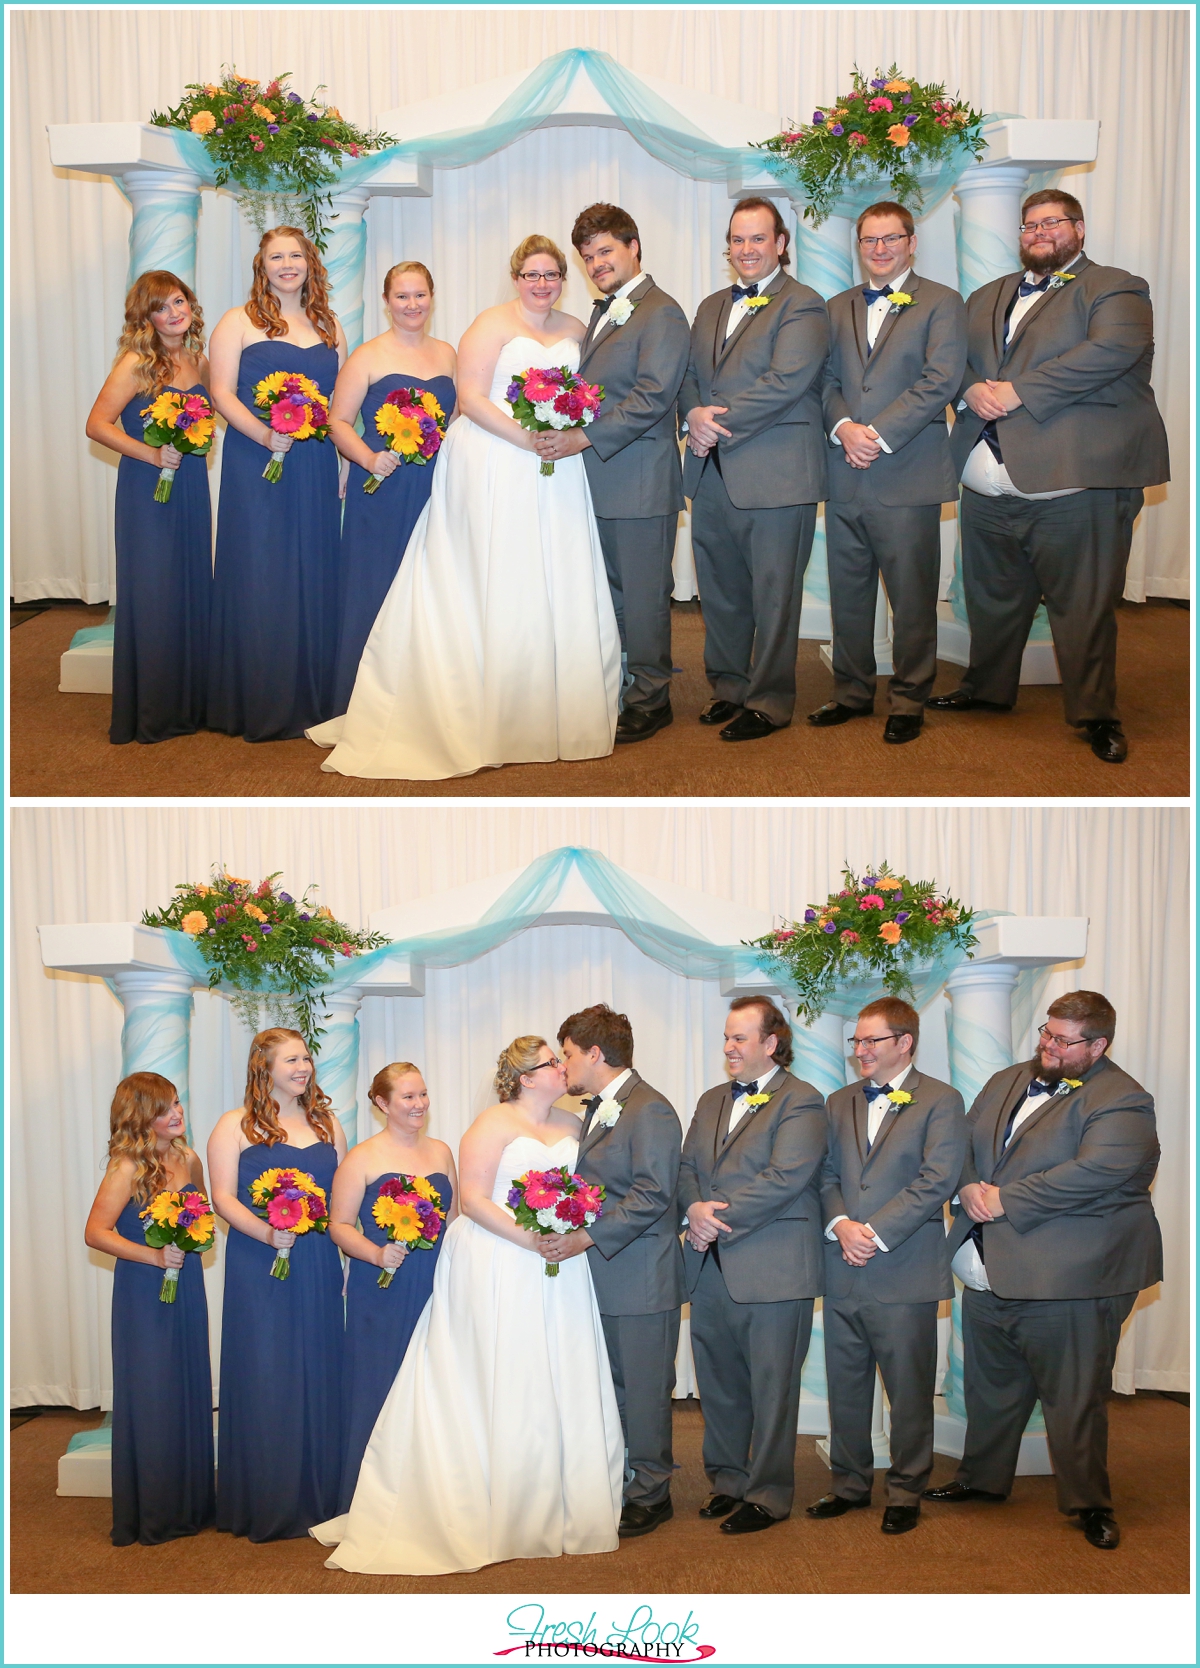 photos of the bridal party